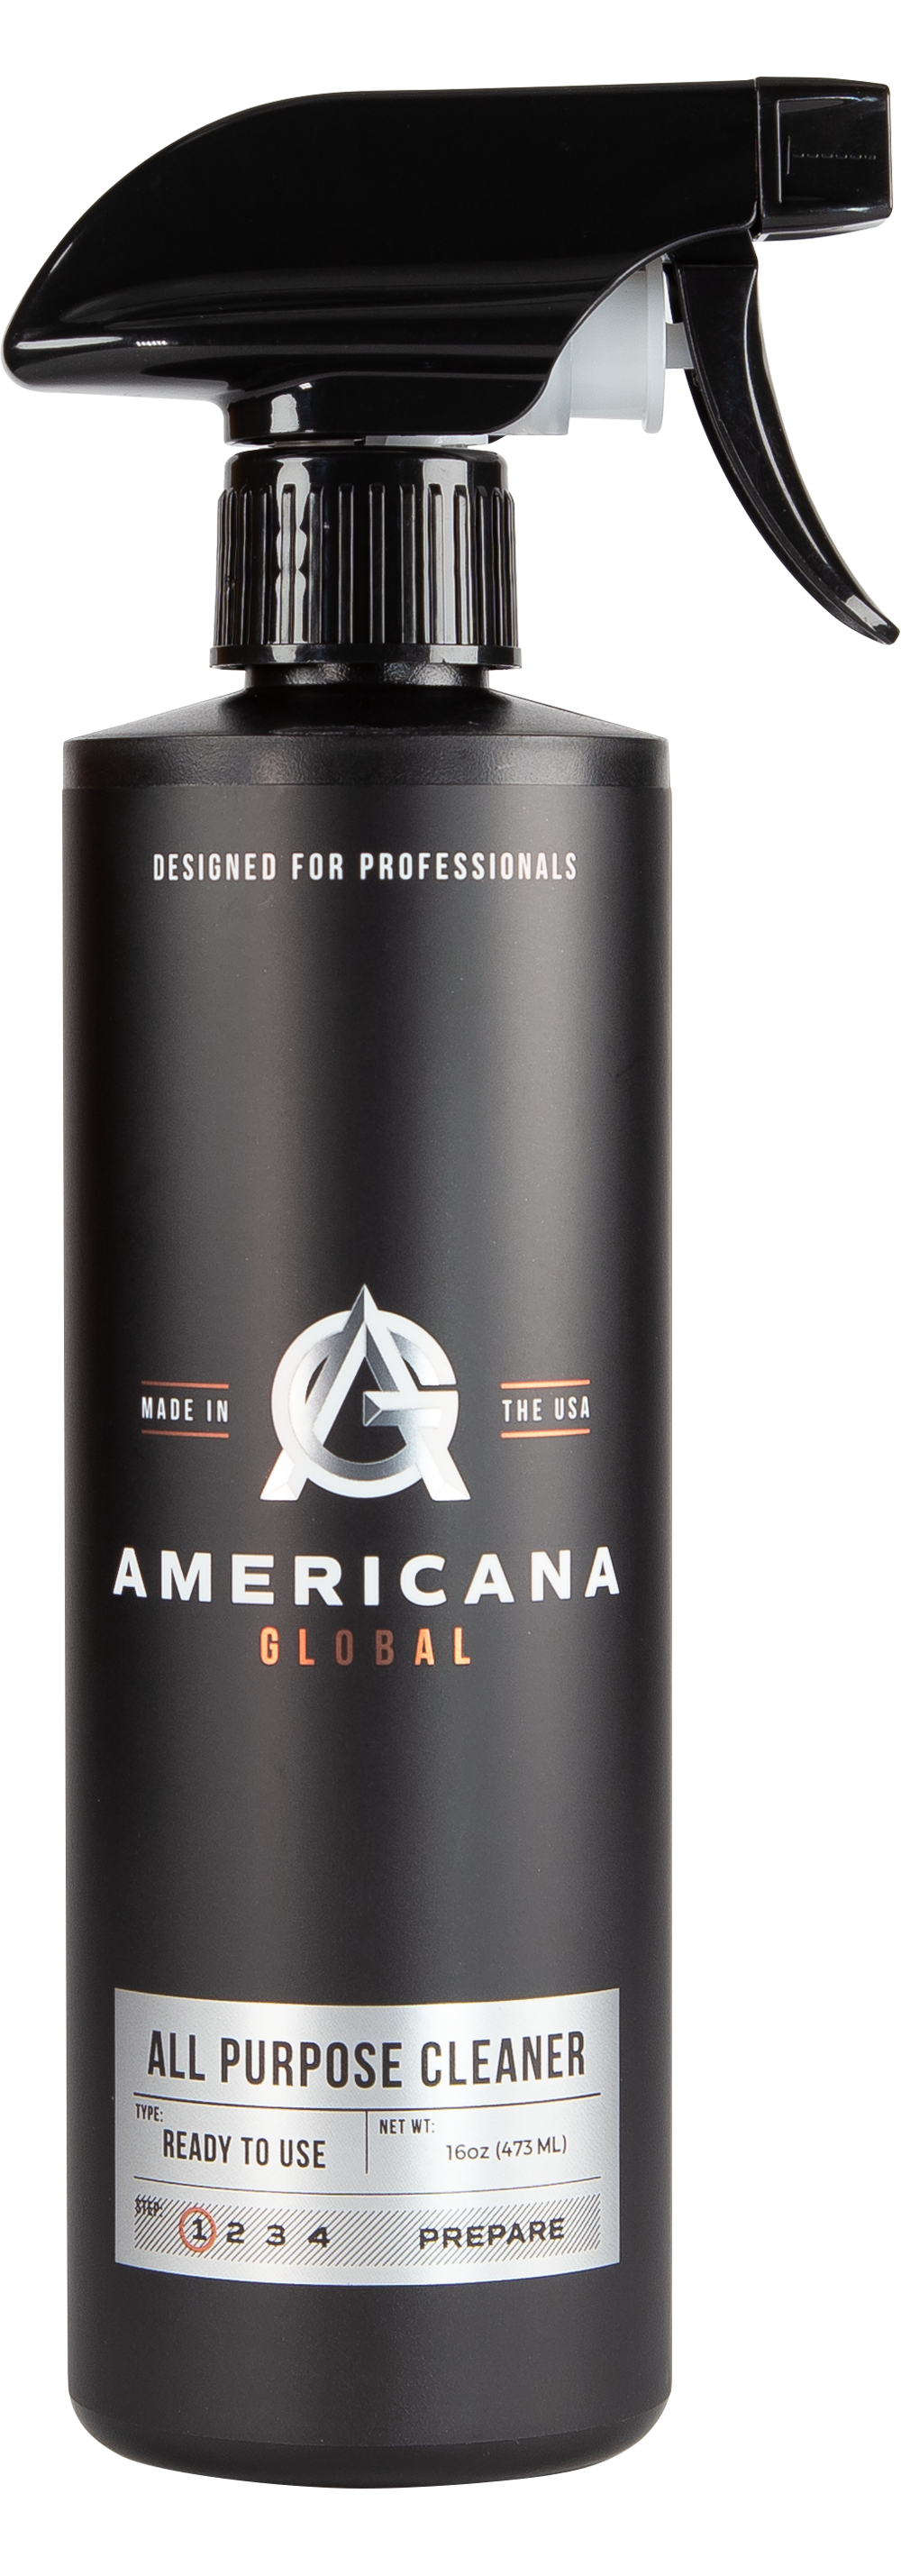 Americana Global - All Purpose Cleaner (Ready to Use)